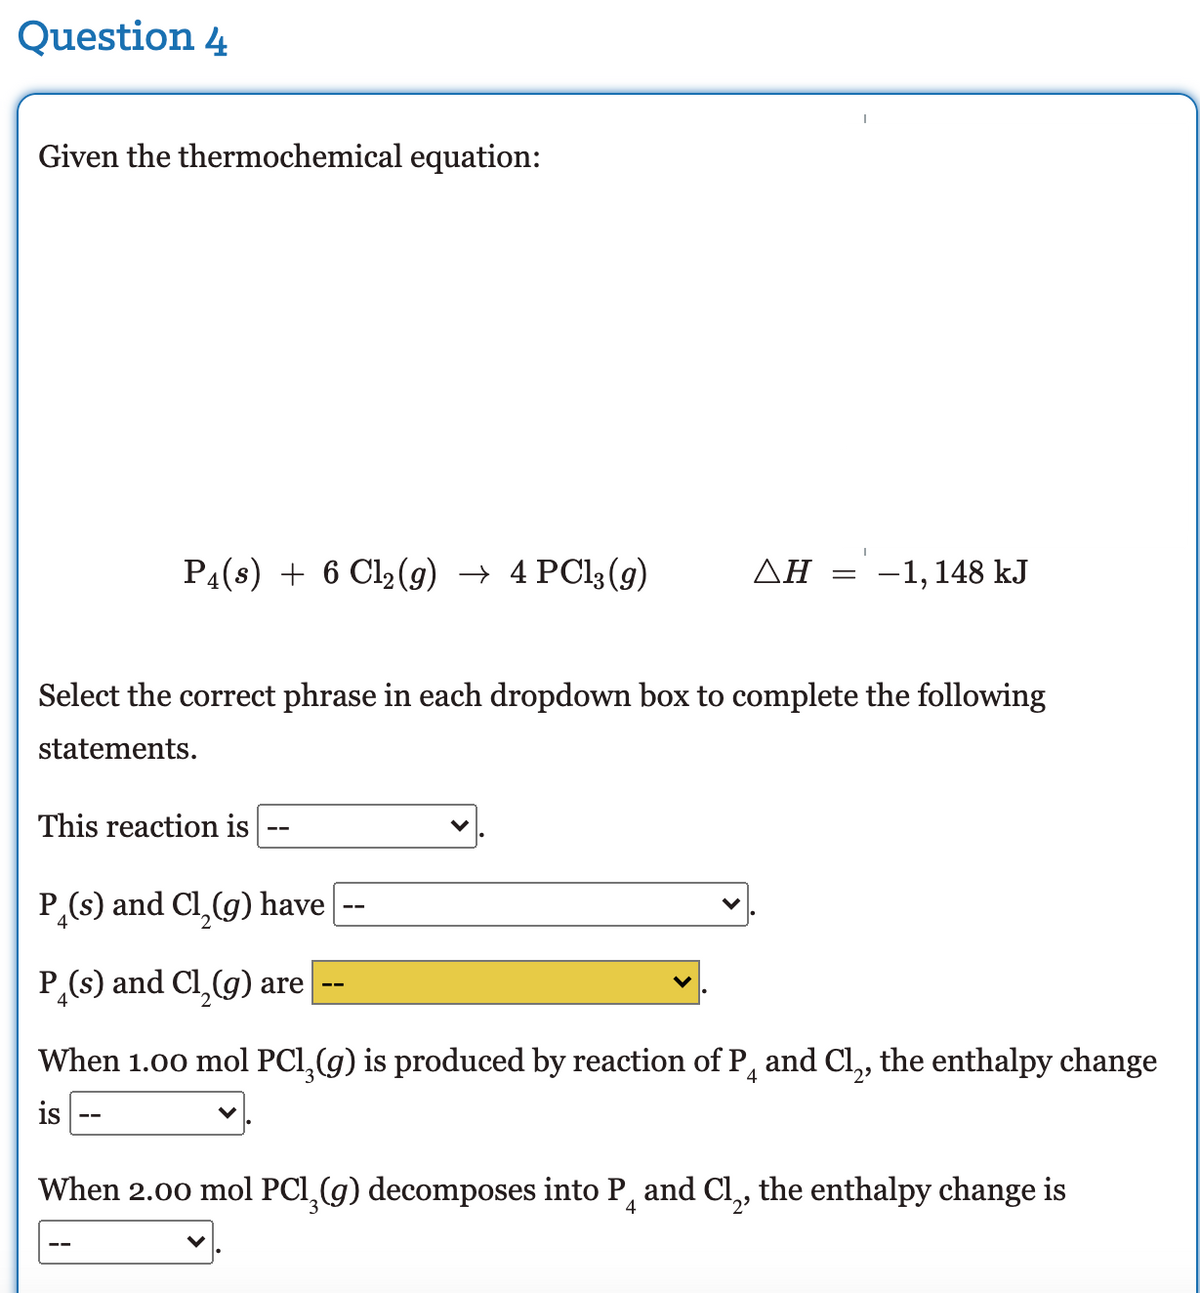 Question 4
Given the thermochemical equation:
P4(s) + 6 Cl2(9) → 4 PCI3 (9)
AH =
-1, 148 kJ
Select the correct phrase in each dropdown box to complete the following
statements.
This reaction is
P,(s) and Cl,(g) have
P(s) and Cl,(g) are
When 1.00 mol PC1,(g) is produced by reaction of P, and Cl, the enthalpy change
2'
is
When 2.00 mol PCI,(g) decomposes into P, and Cl,, the enthalpy change is
2'
